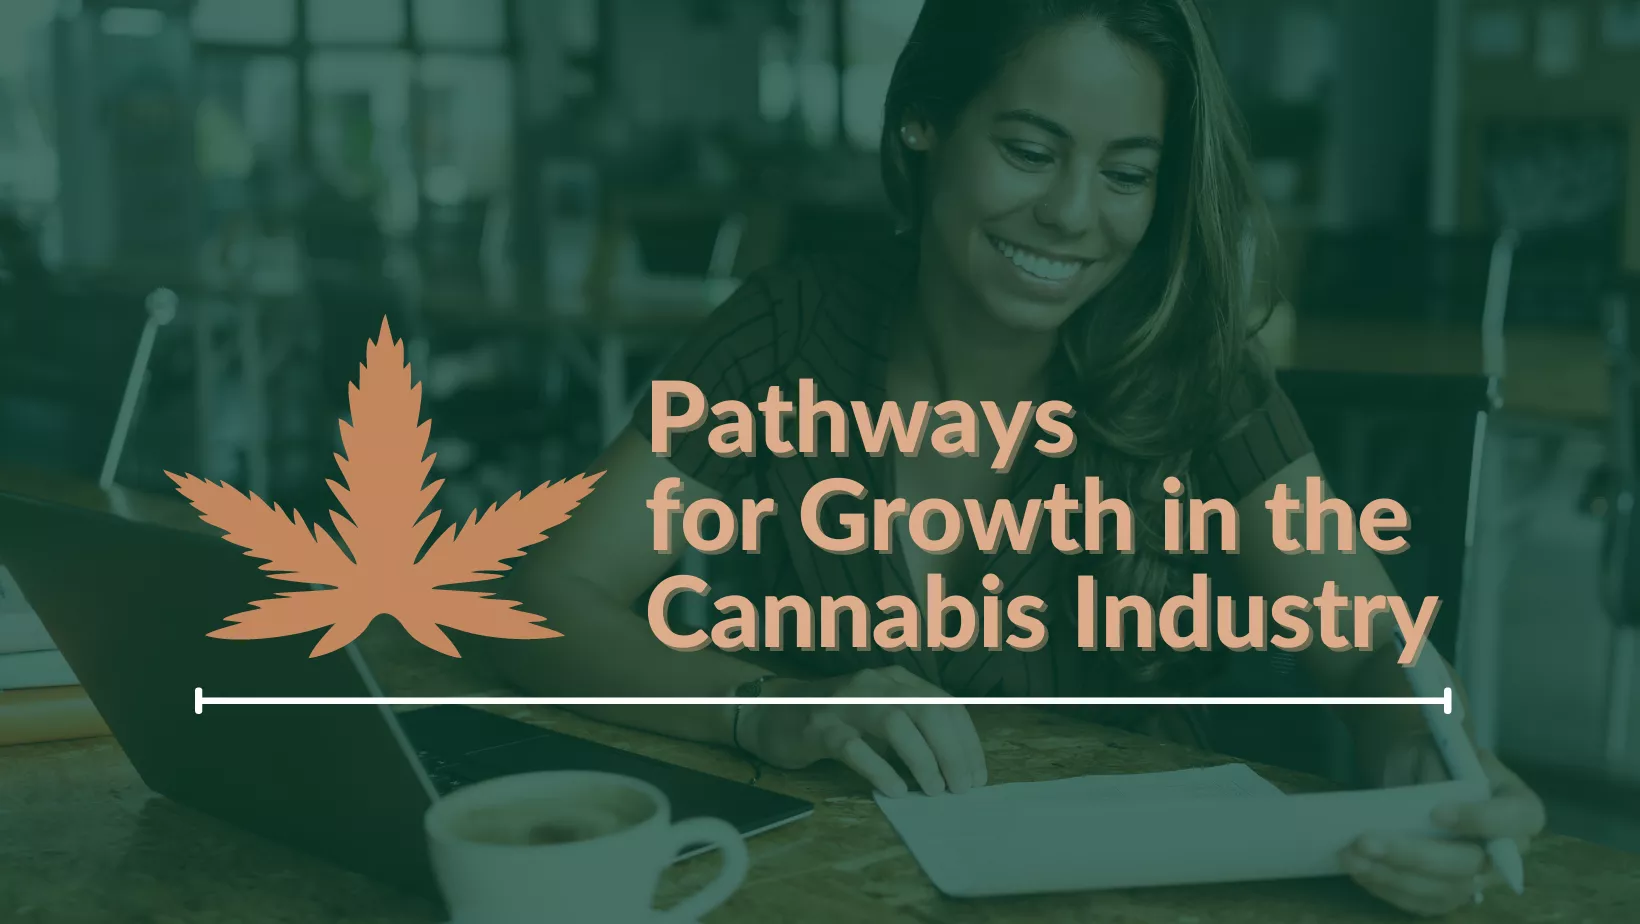 Pathways for Growth in the Cannabis Industry